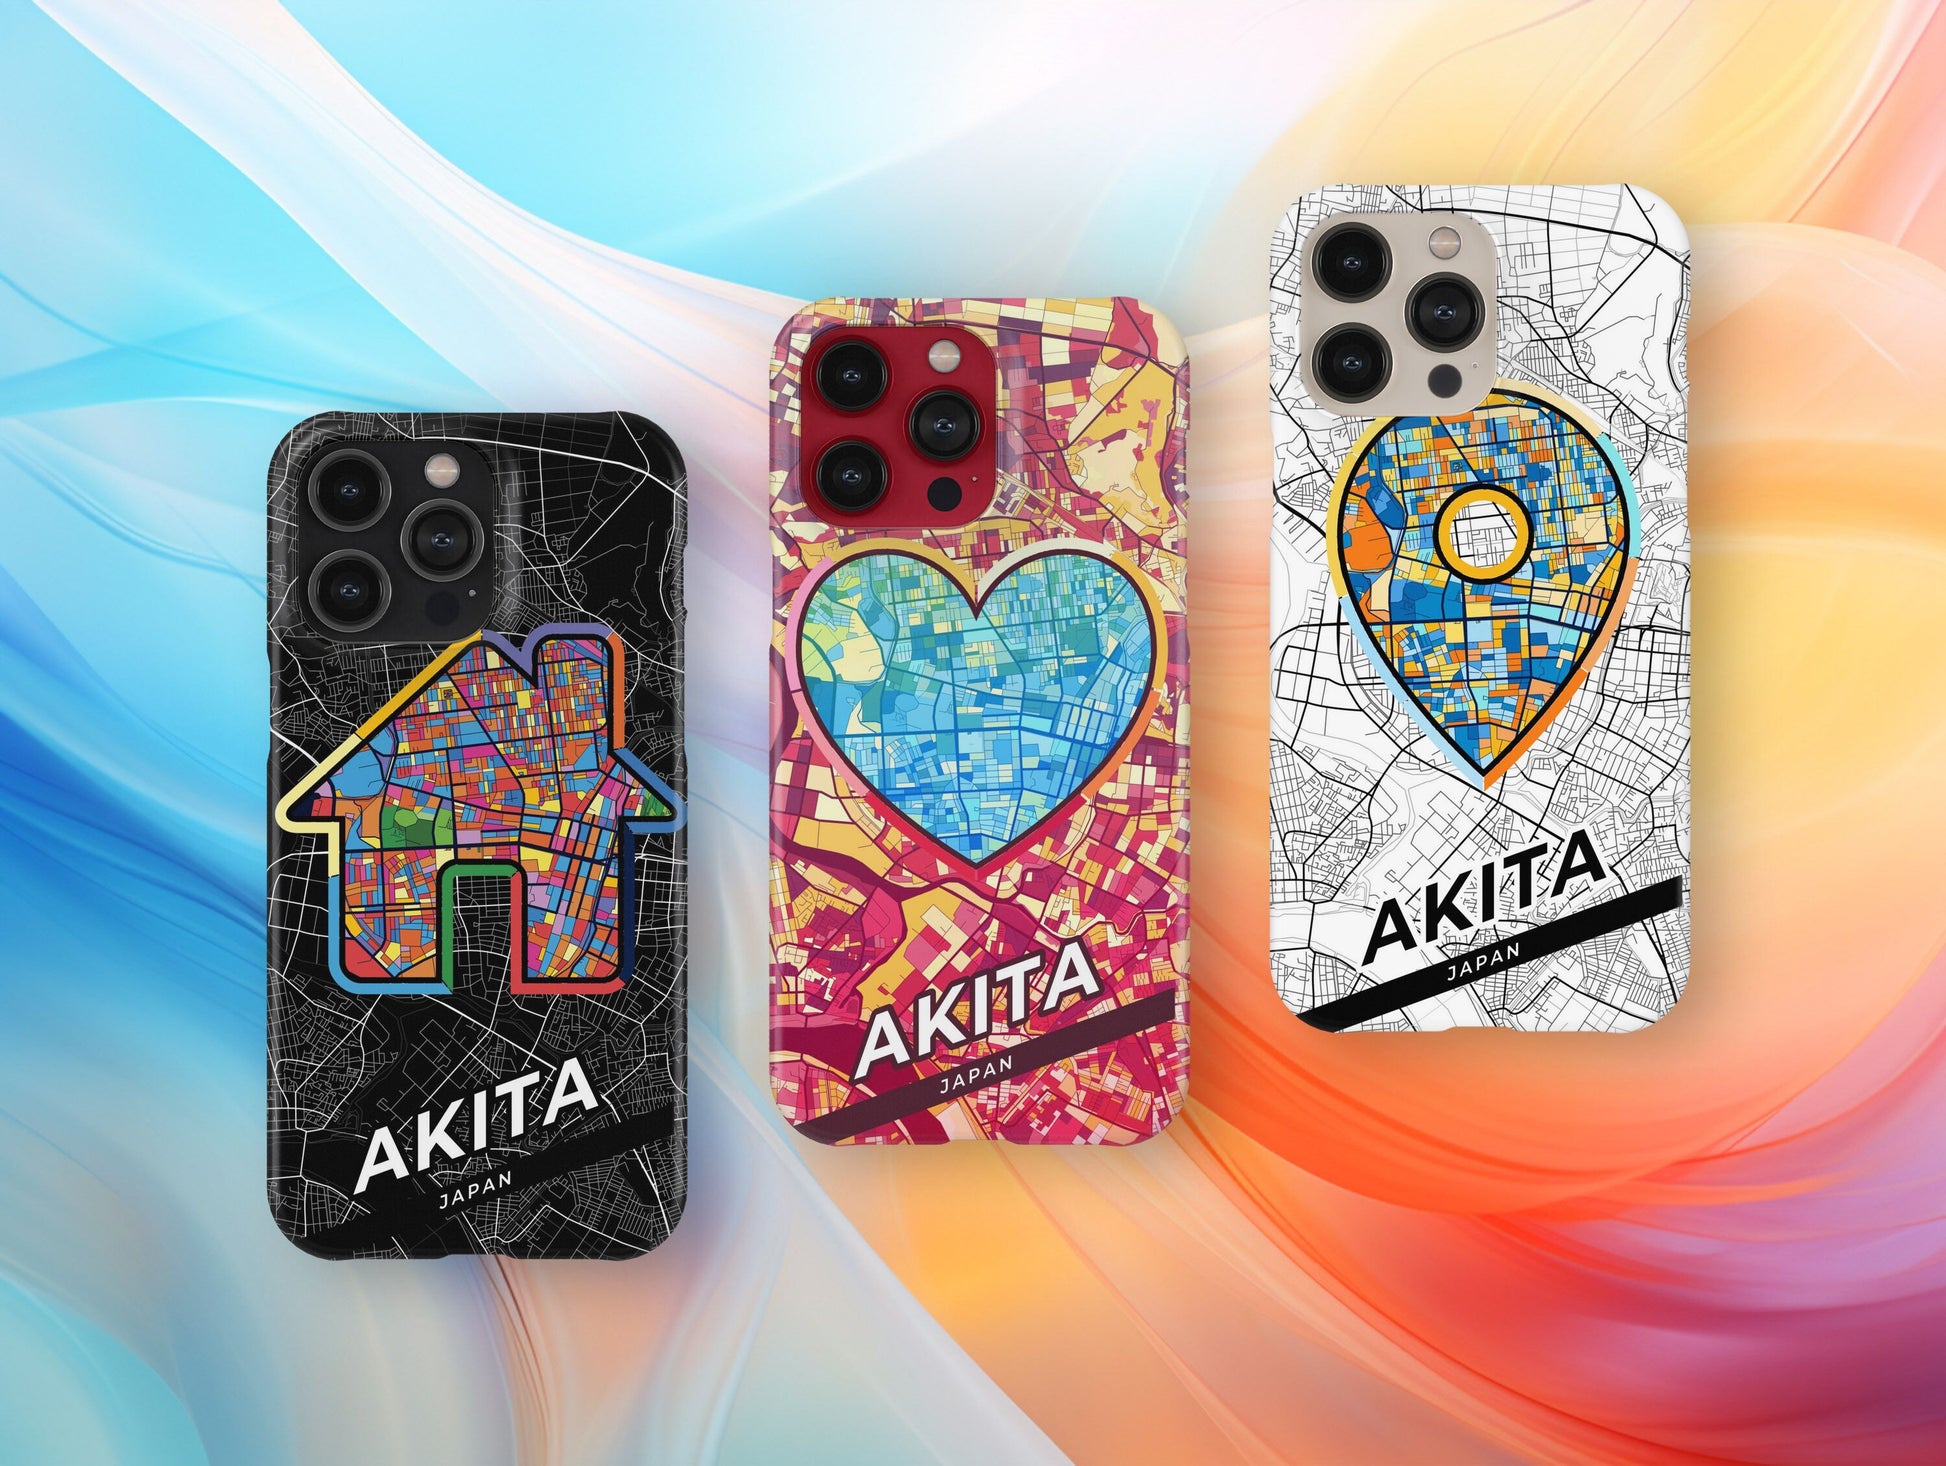 Akita Japan slim phone case with colorful icon. Birthday, wedding or housewarming gift. Couple match cases.